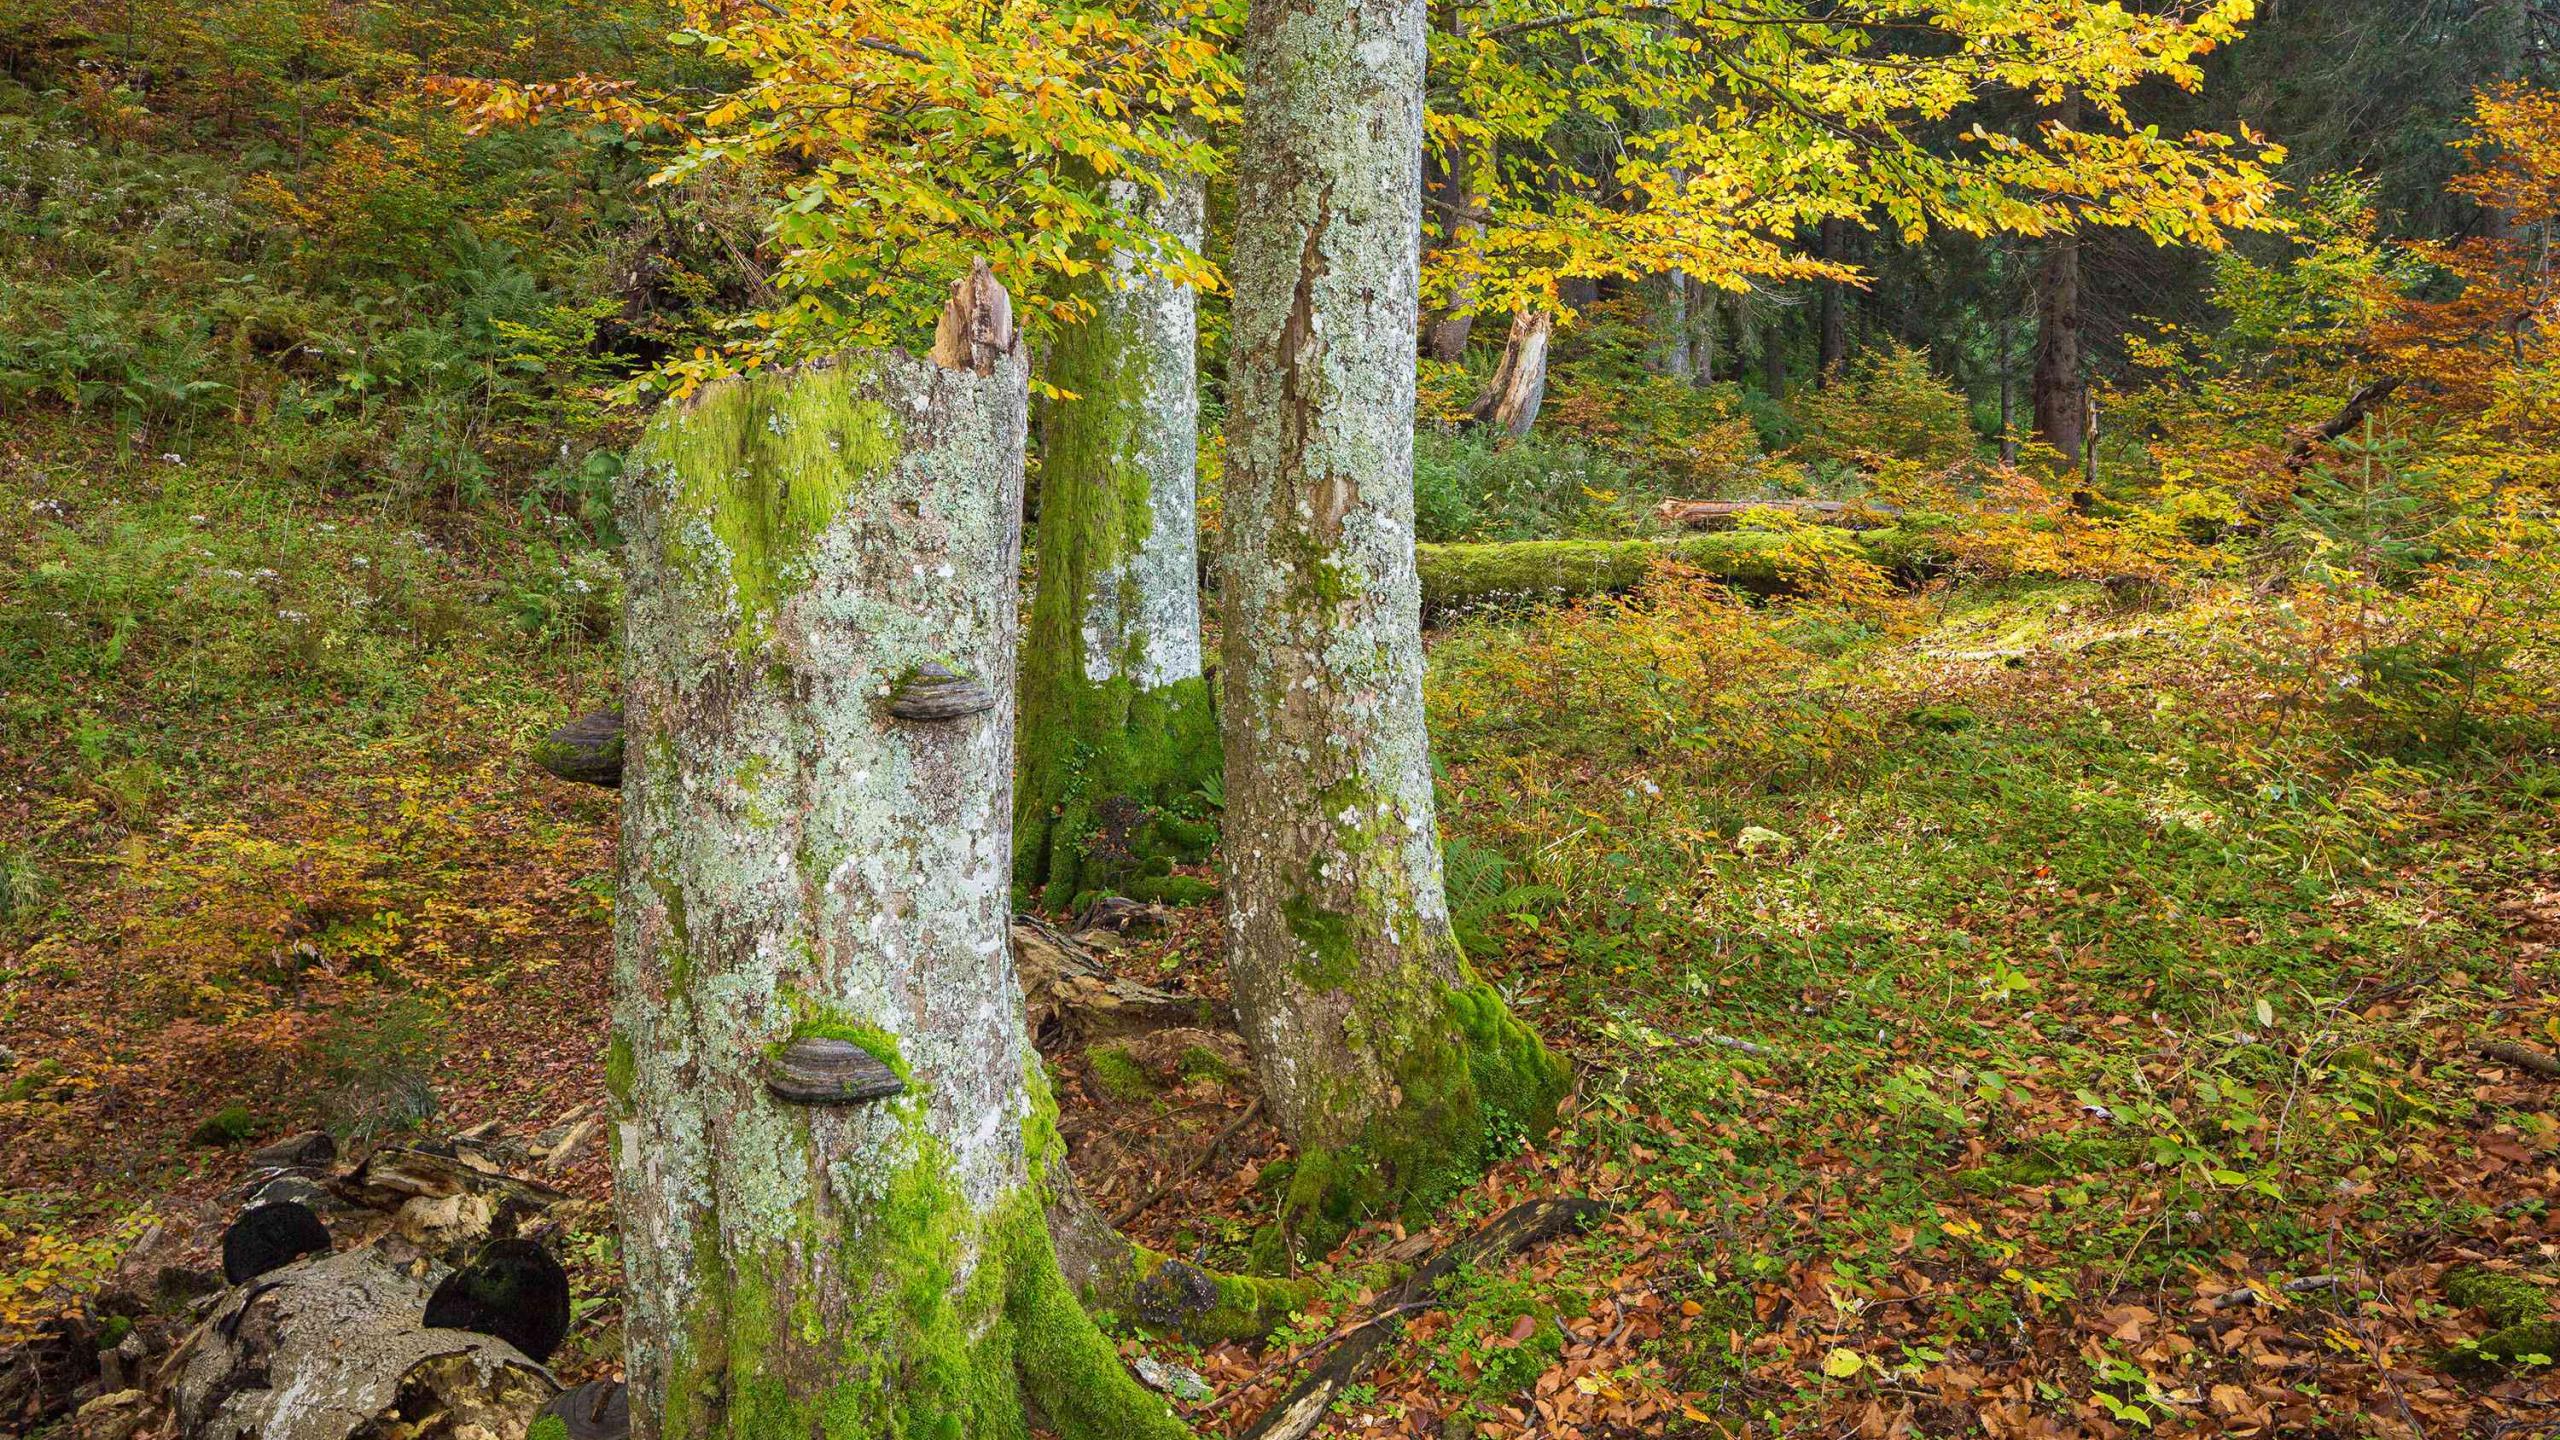 Autumnal beech forest with yellow - green - orange colored leaves, in the foreground standing dead wood with mushrooms